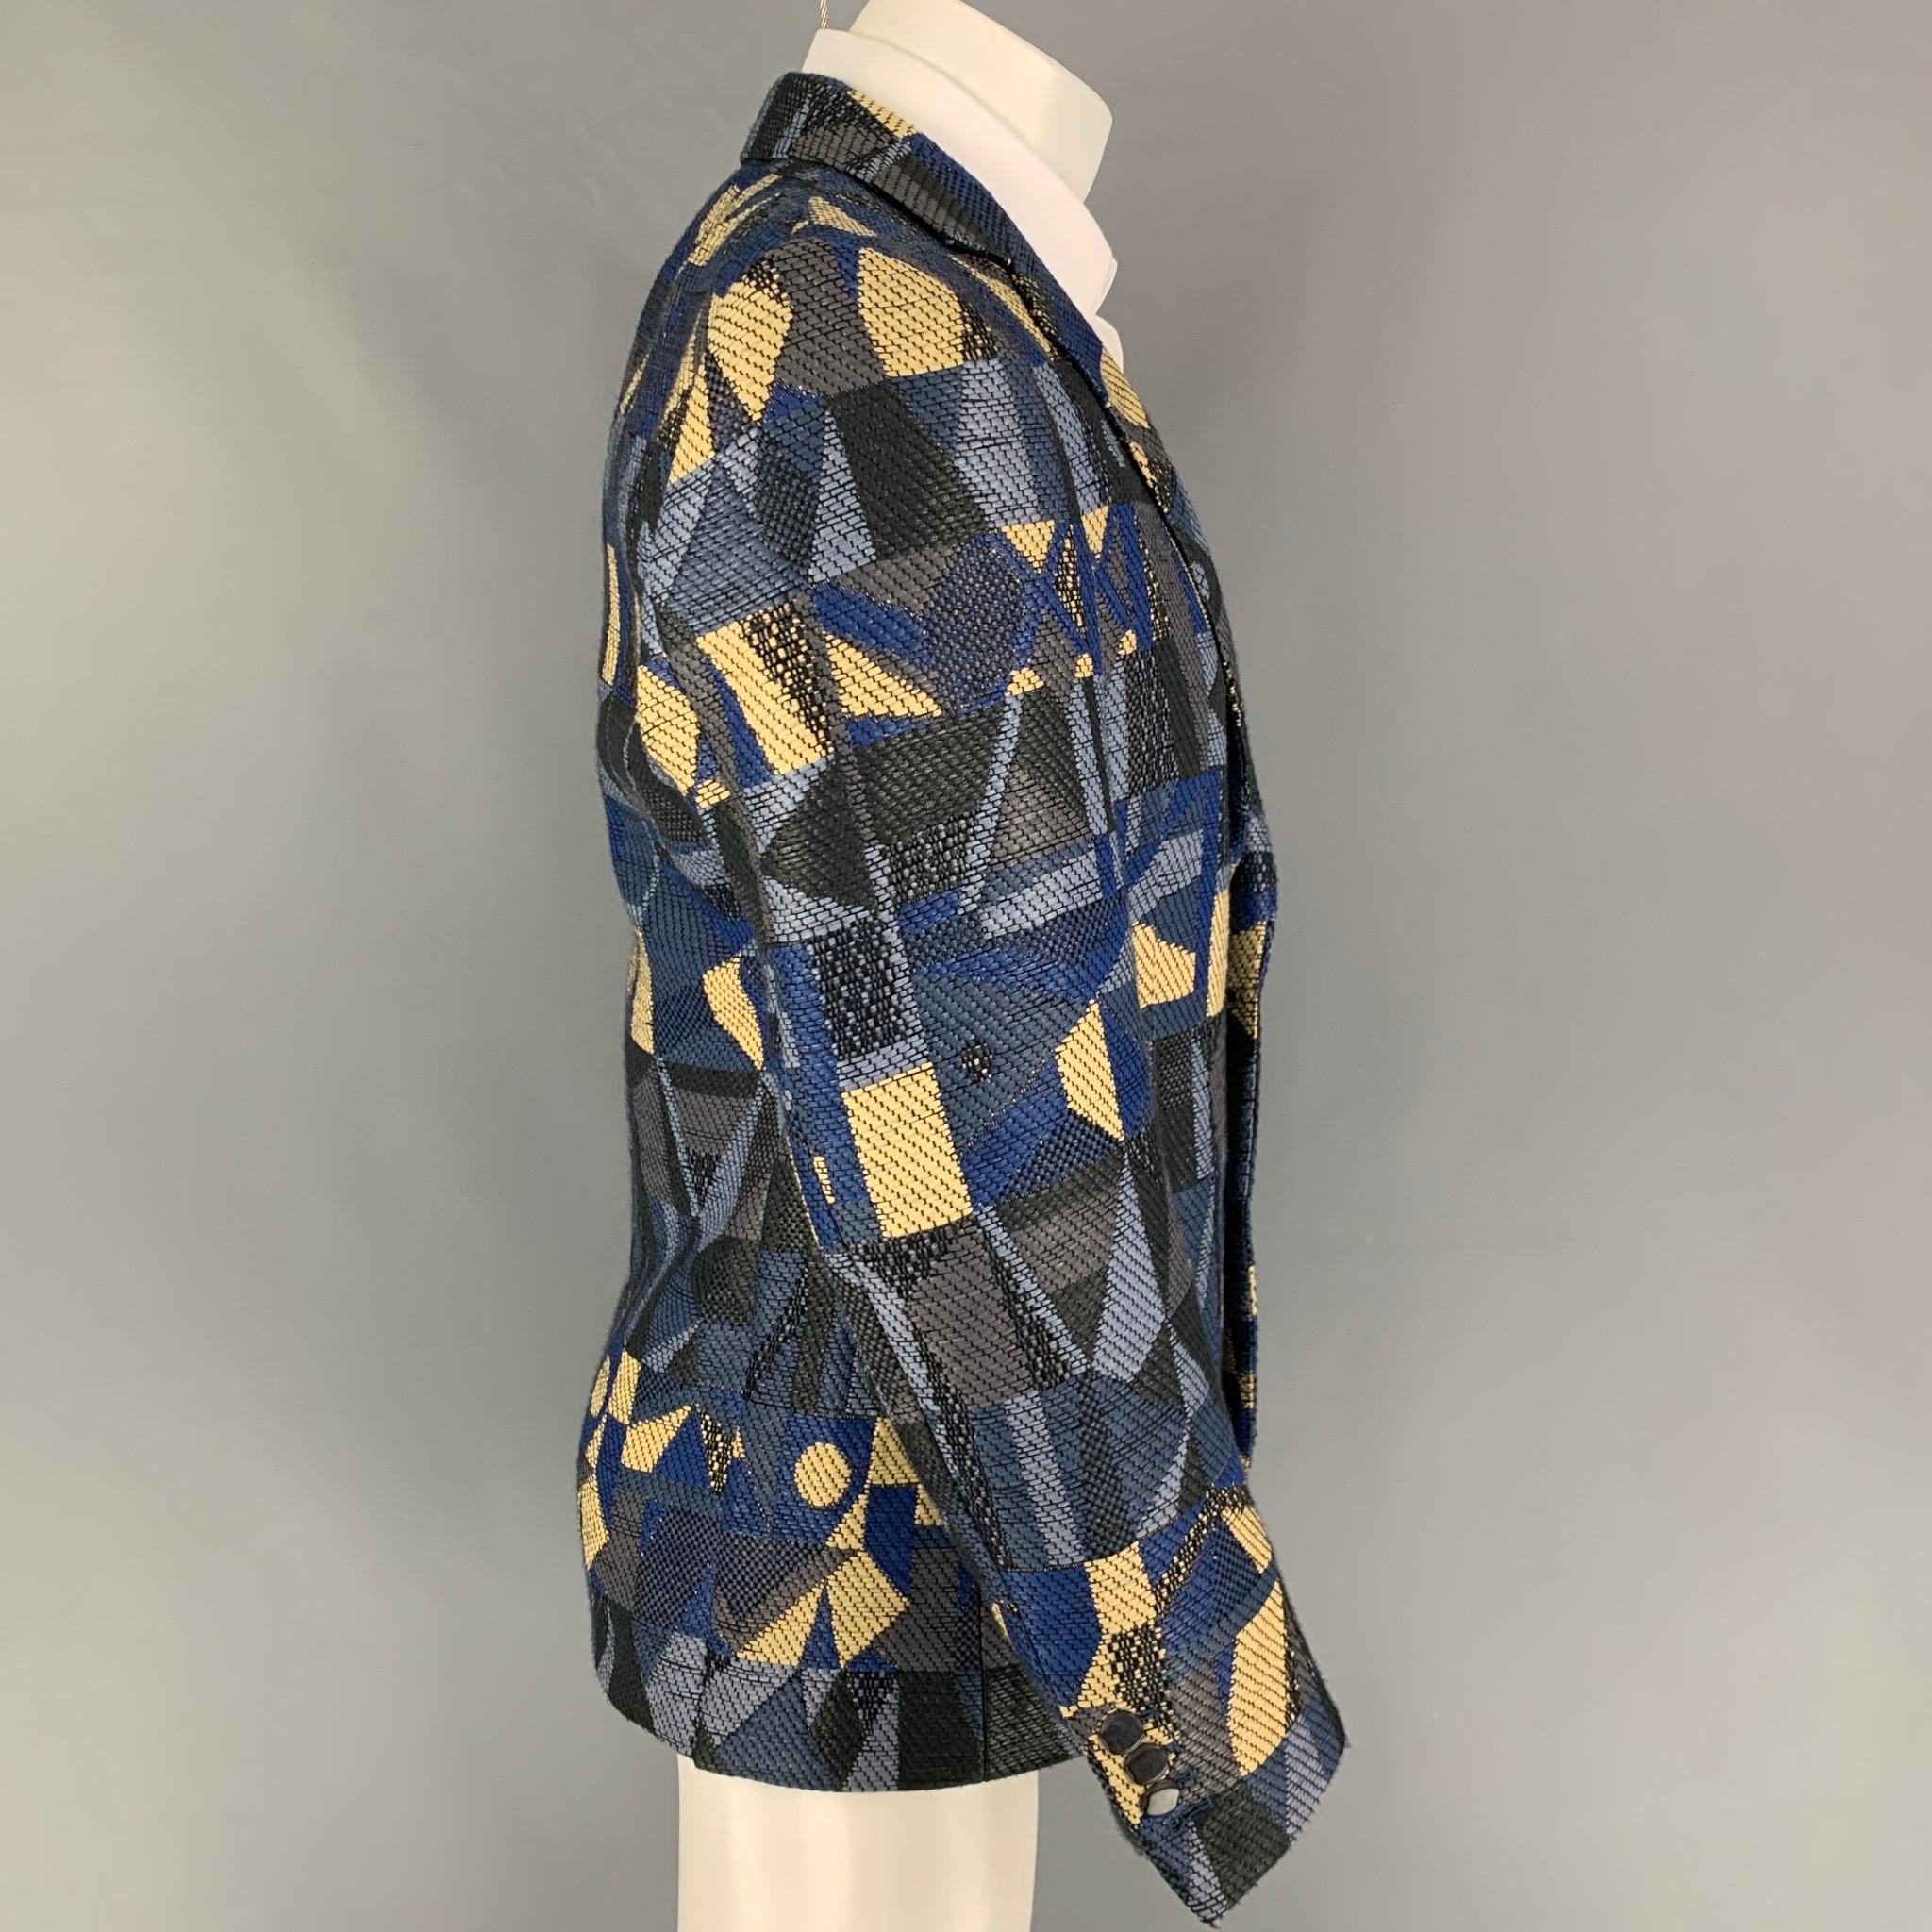 WALTER VAN BEIRENDONCK SS 14 sport coat comes in a multi-color woven cotton / acrylic with a half liner featuring a notch lapel, flap pockets, and a double button closure. Made in Belgium.

Excellent Pre-Owned Condition.
Marked: